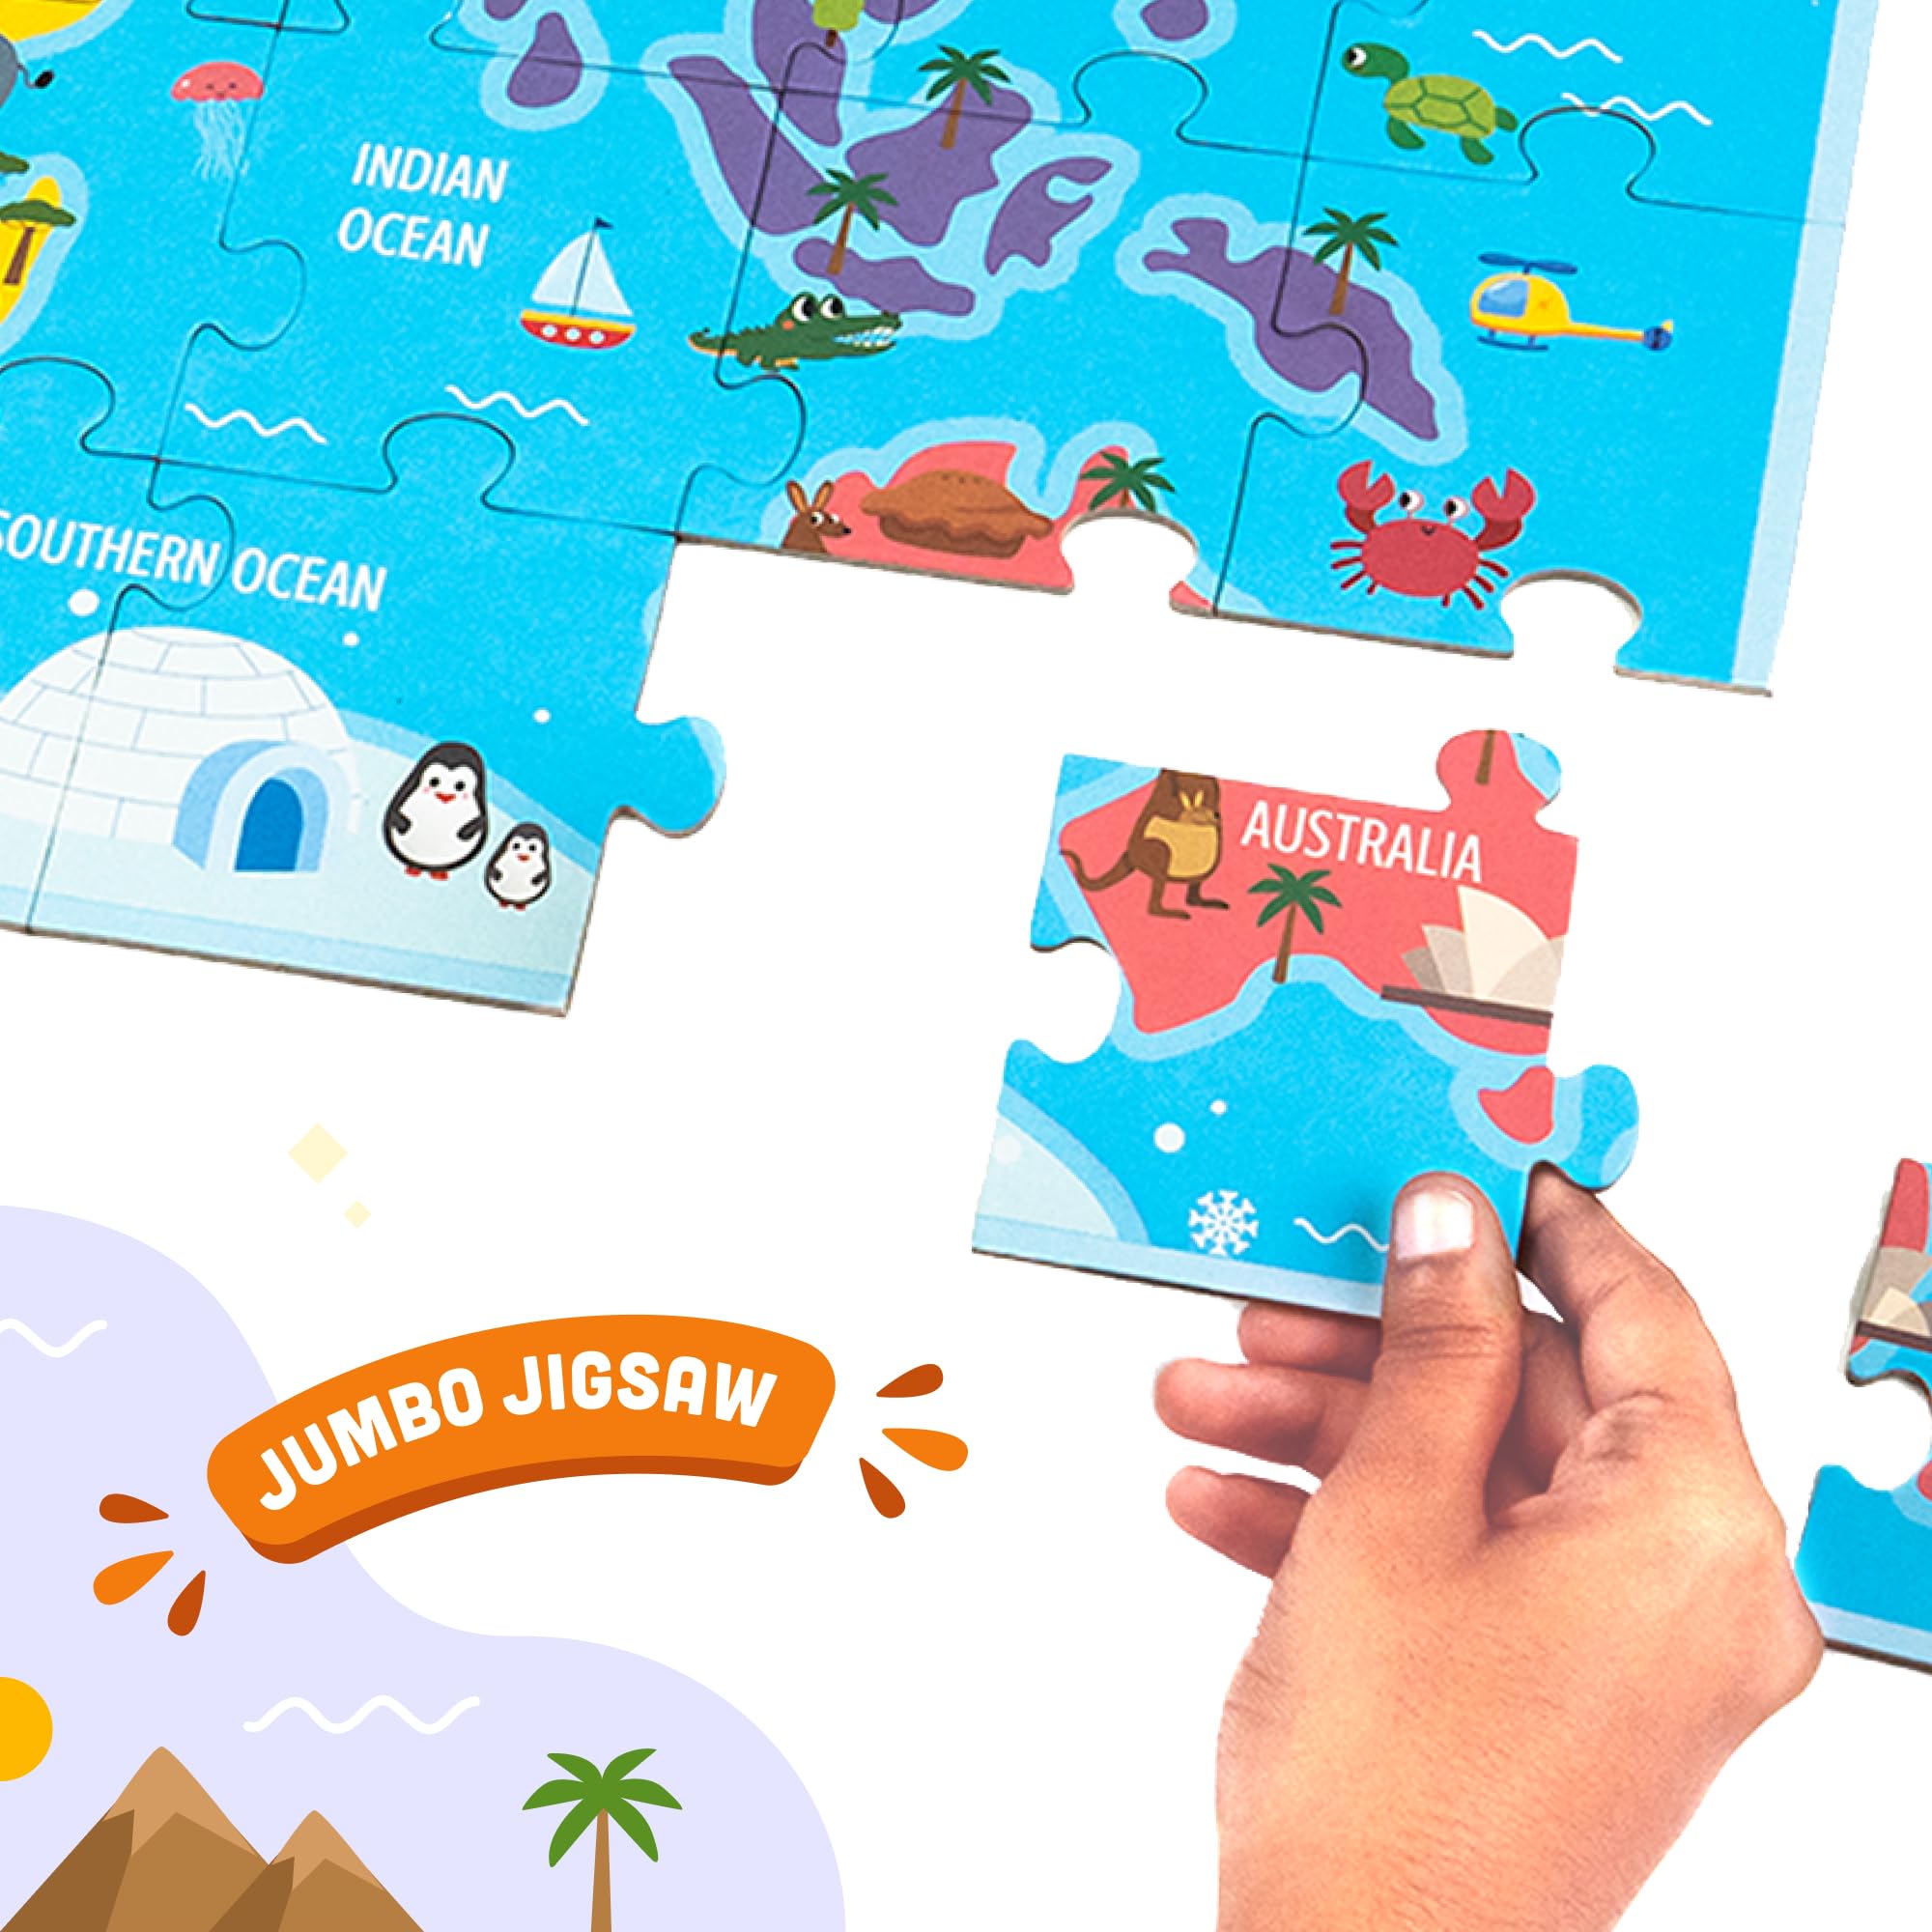 World Map Jigsaw Puzzle for Toddlers | Where is it? Wonderful World - LoveDabble | Flashcards for Kids | Search & Find Puzzles for Kids | for Ages 3 4 5 | Birthday Gifts for Boys and Girls